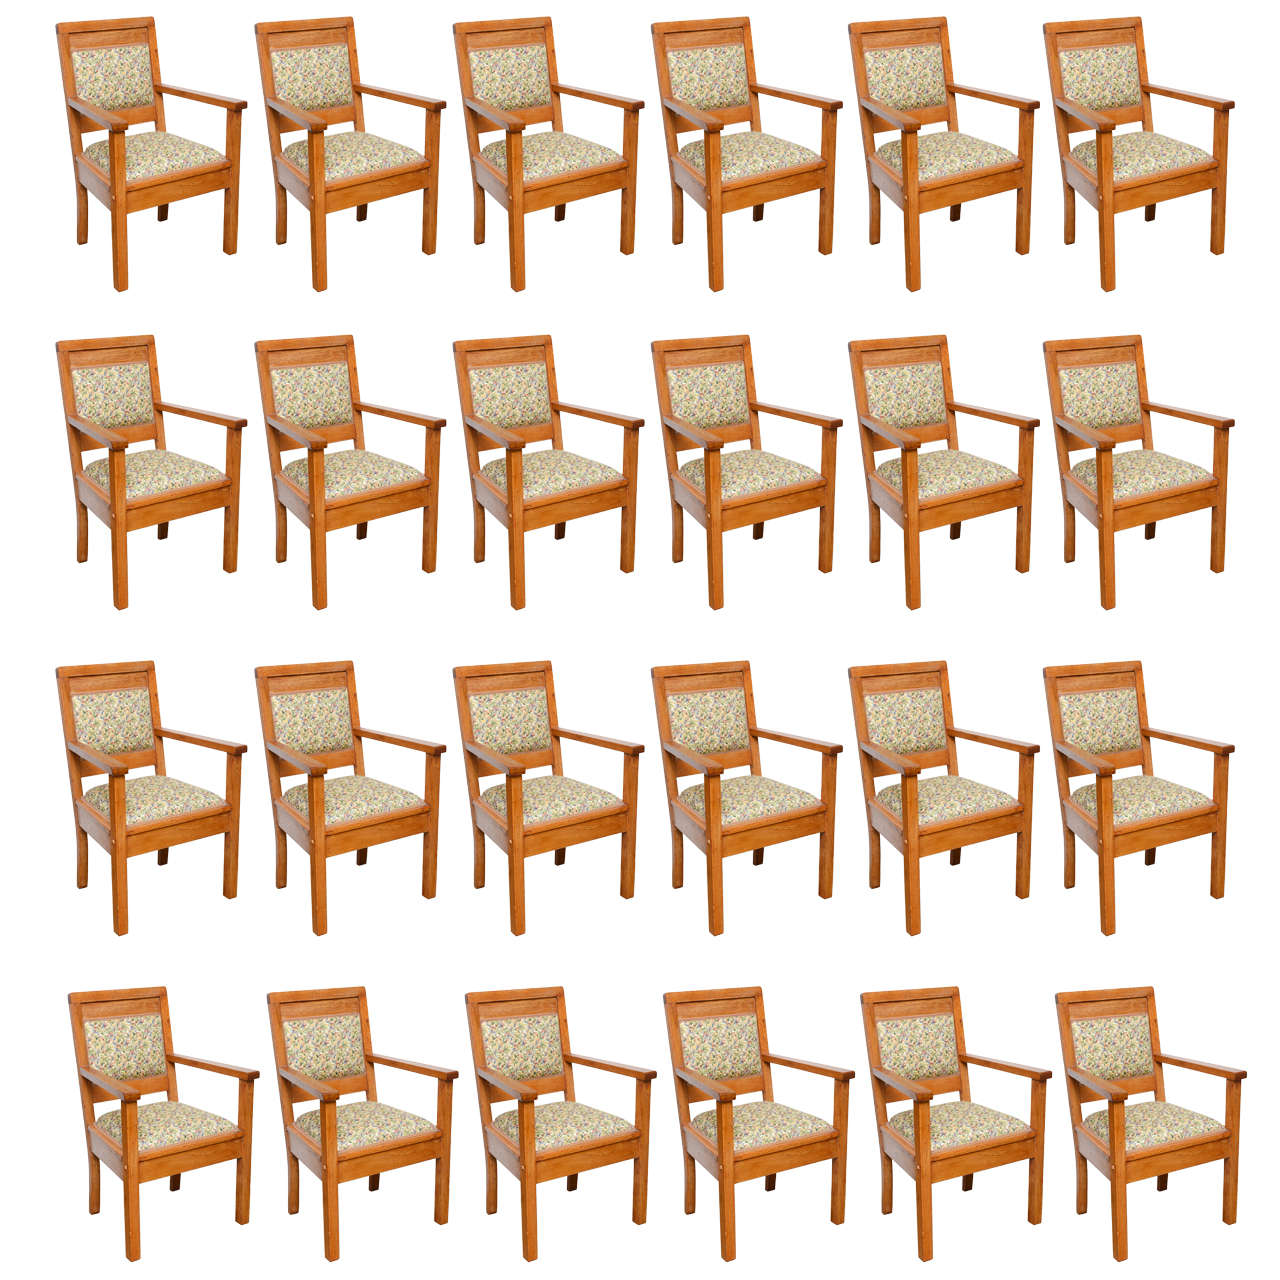 Set of 24 Matching Arts & Crafts or Mission Armchairs, circa 1915 For Sale